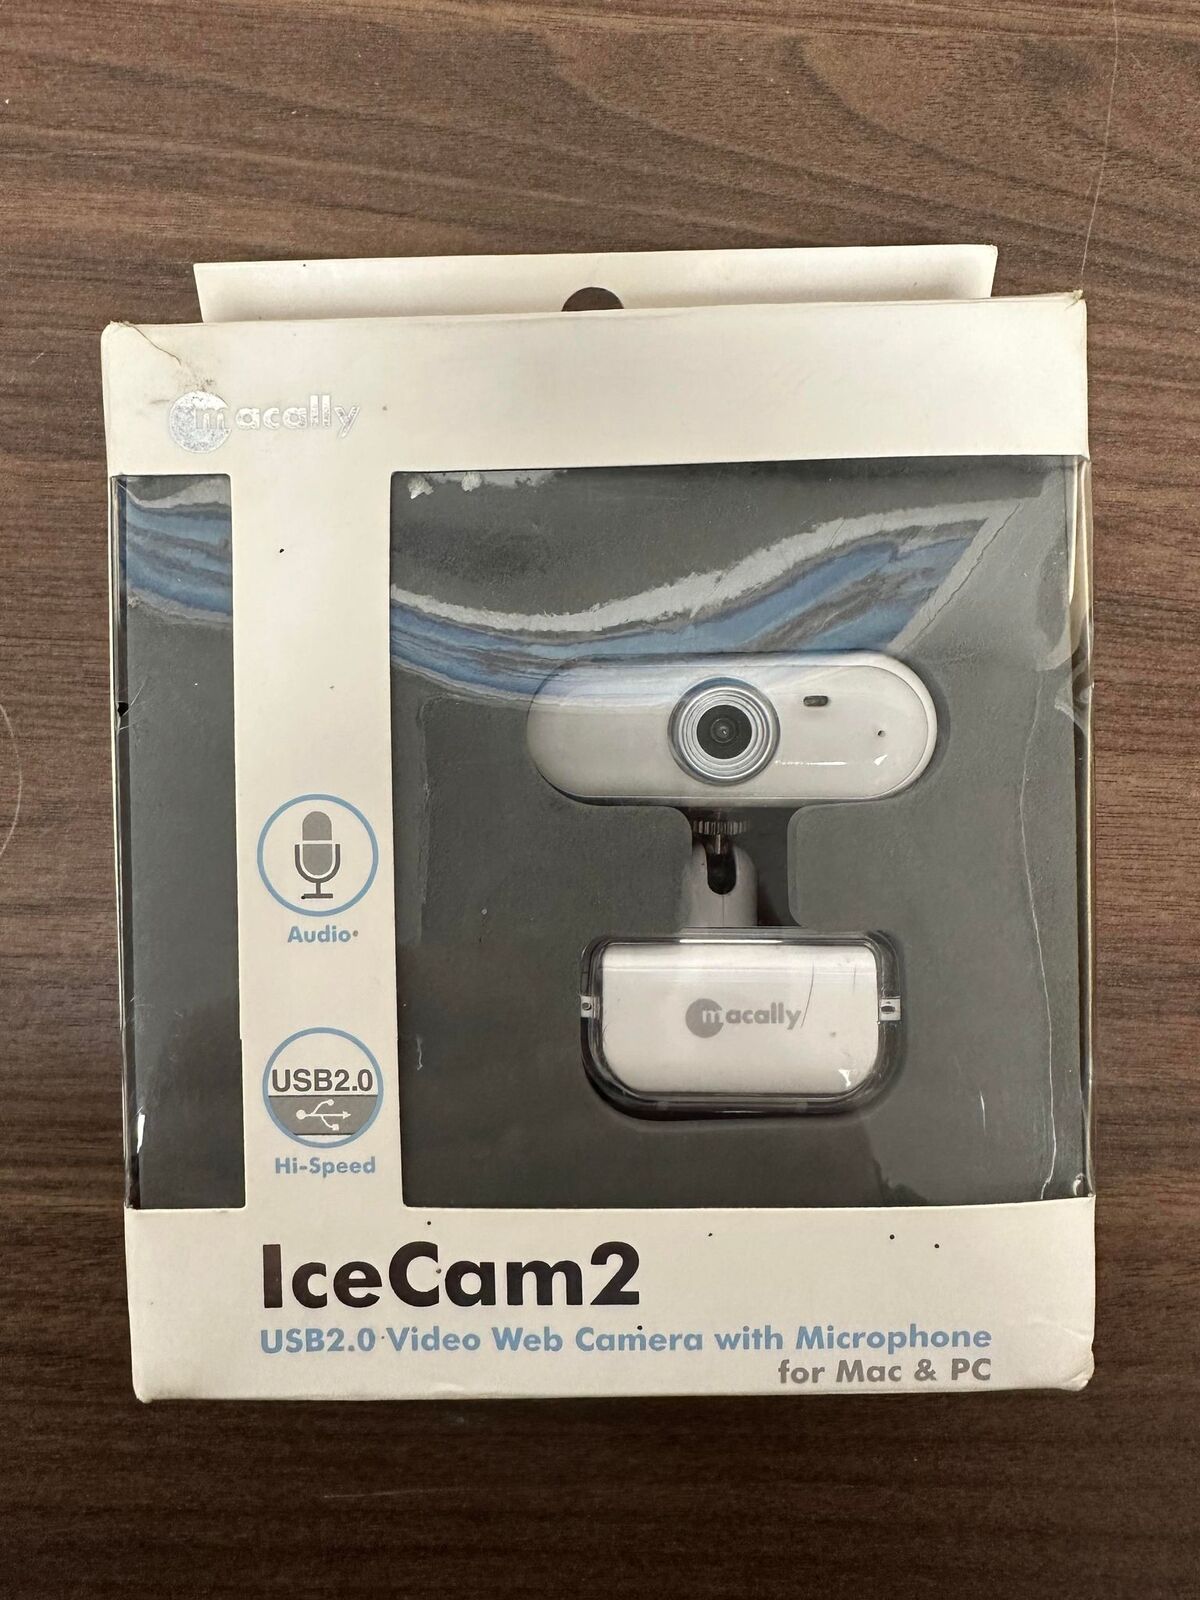 Macally ICECAM2 USB 2.0 Video Web Camera with Built-in Microphone (White)